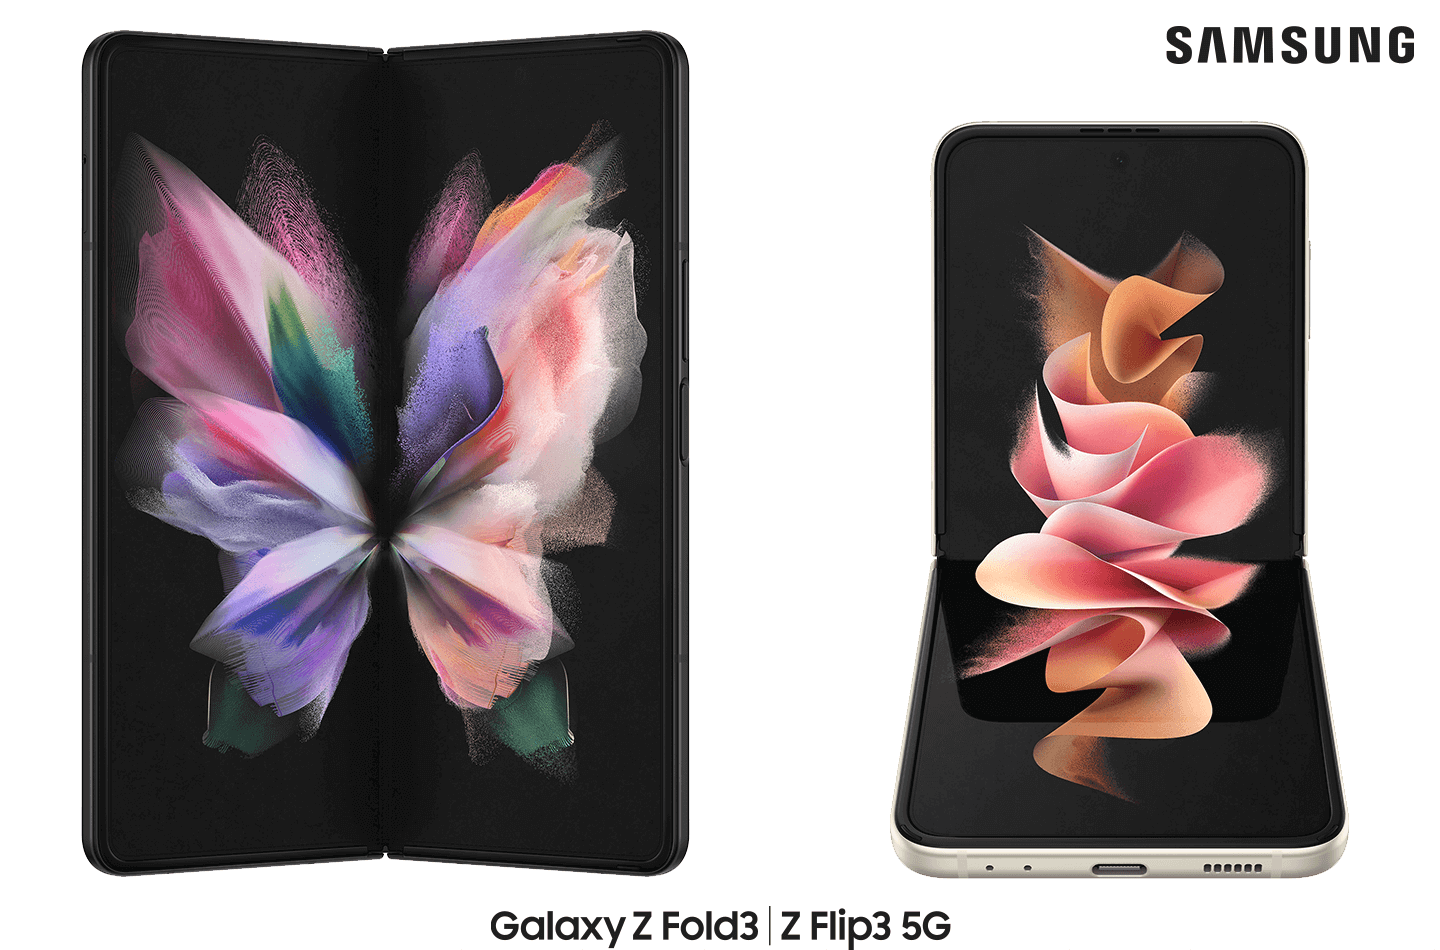 Samsung Galaxy Fold 3 + Buds 2 + Note Package